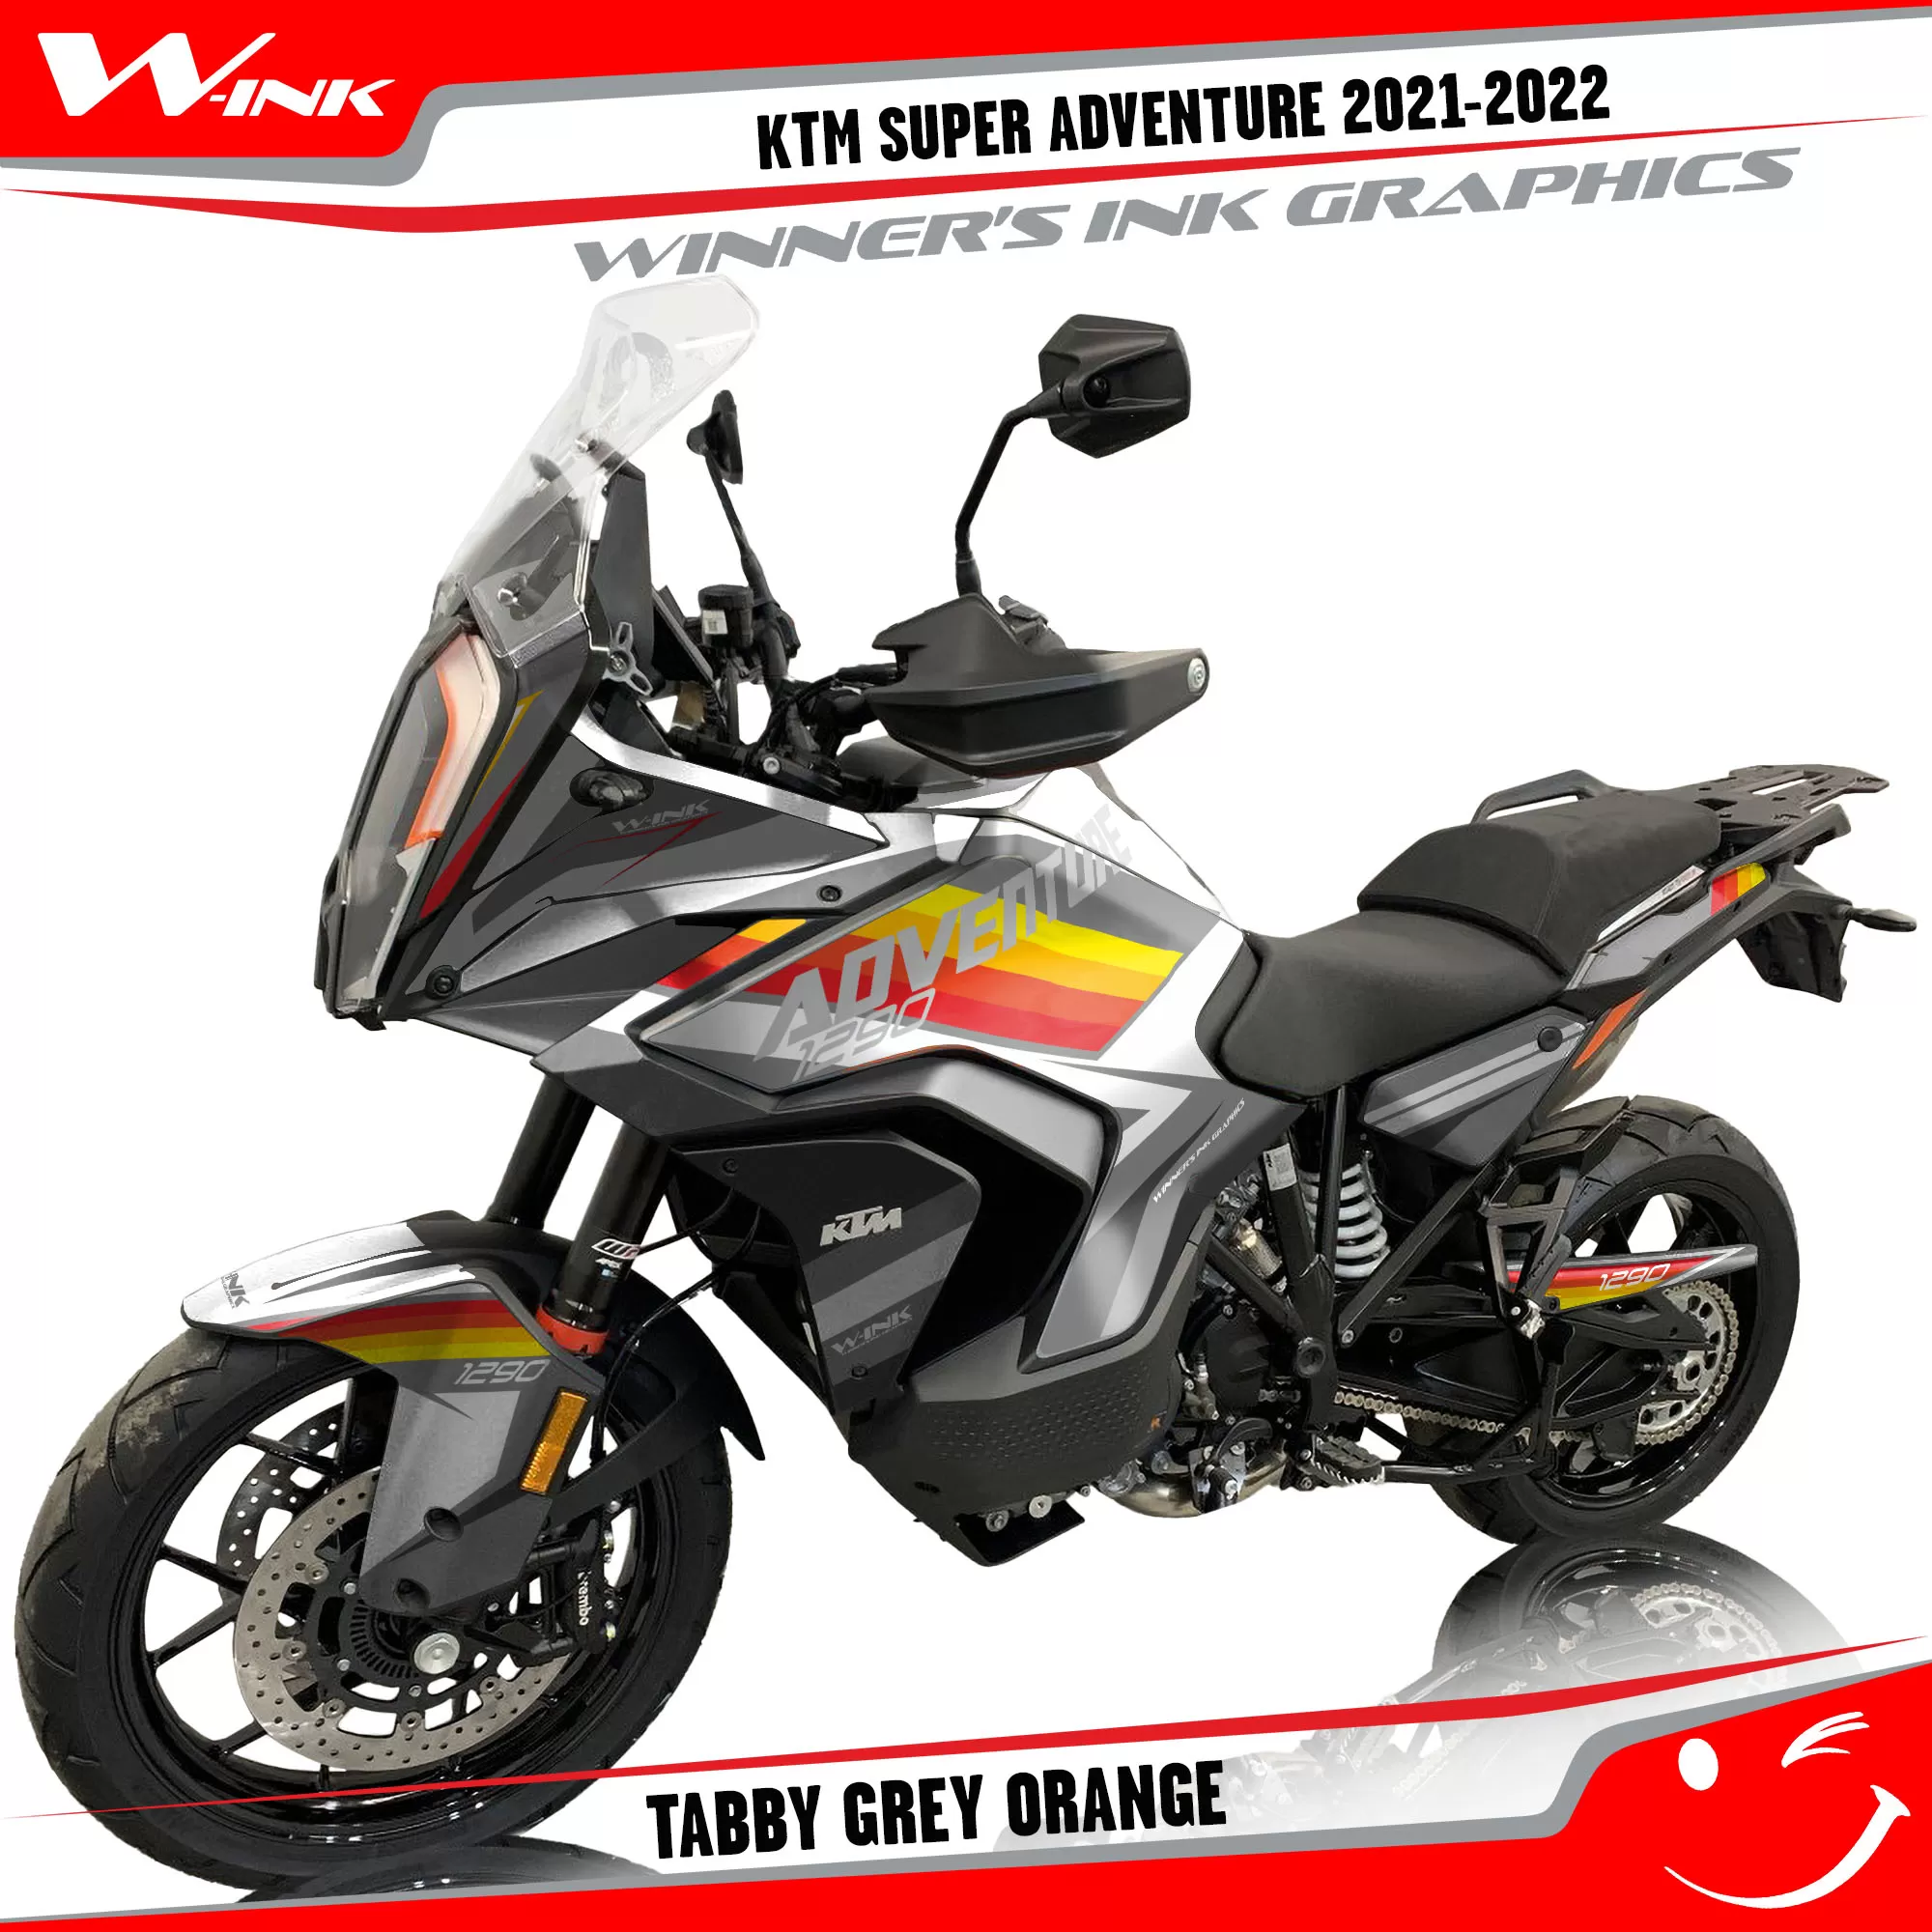 KTM-Super-Adventure-S-2021-2022-graphics-kit-and-decals-with-designs-Tabby-Grey-Orange